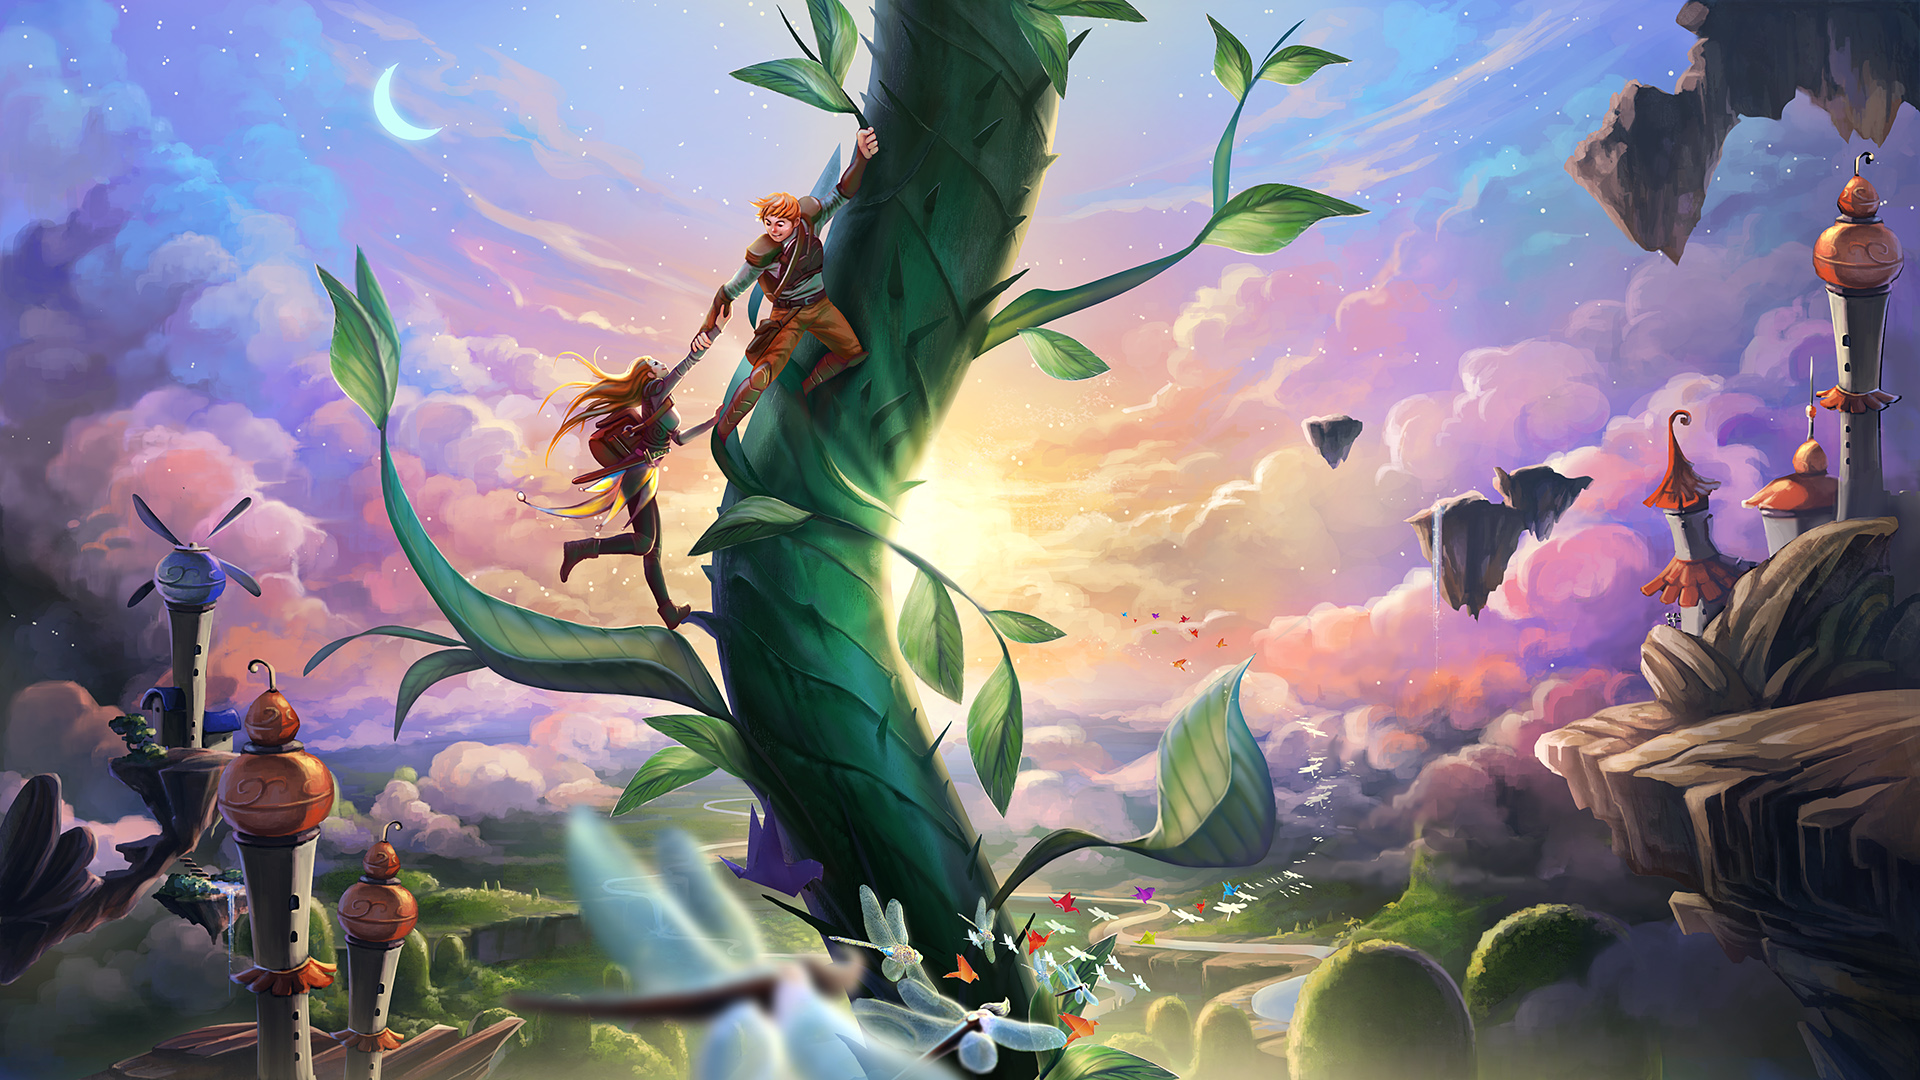 Jack And The Beanstalk Fairy Tale 1920x1080